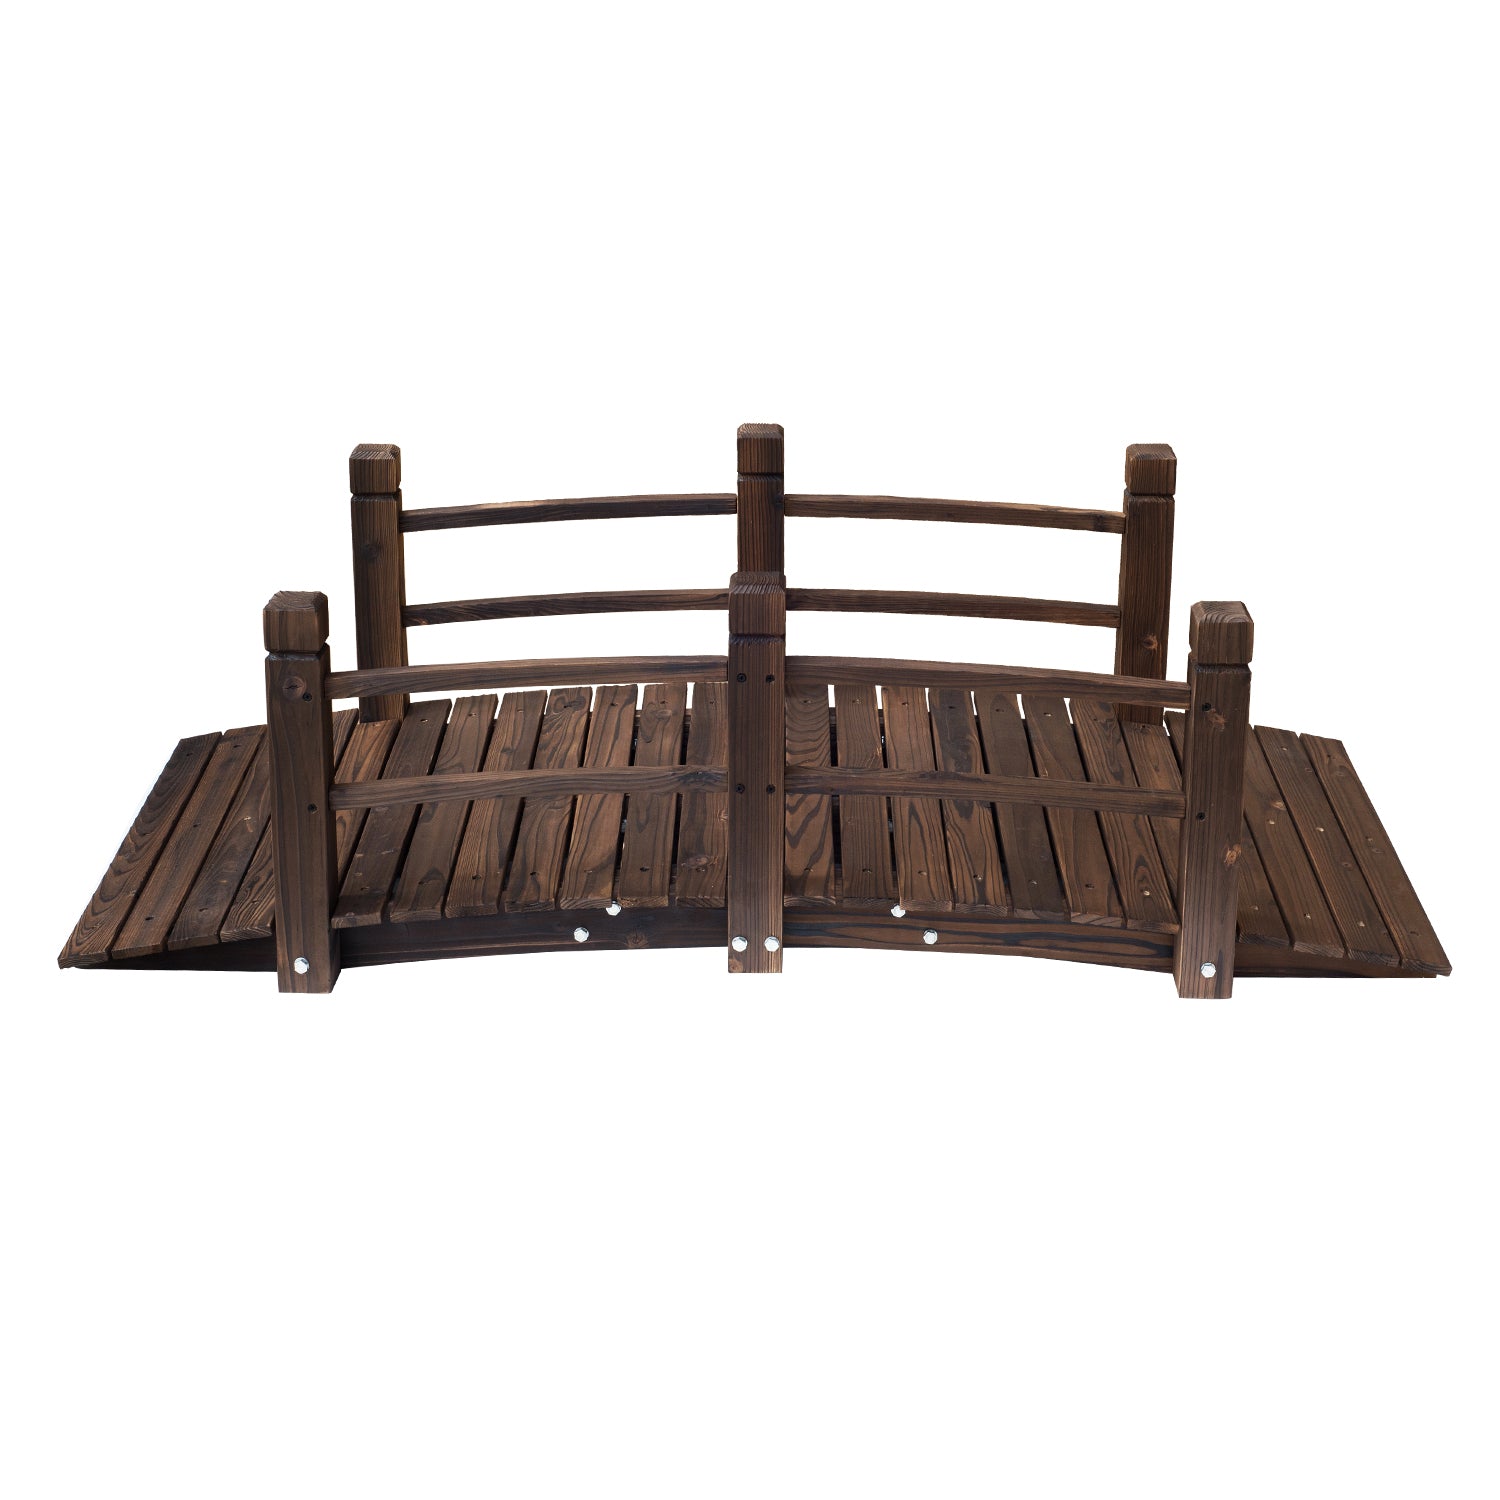 Outsunny Wooden Garden Bridge Lawn Décor Stained Finish Arc Outdoor Pond Walkway w/ Railings - Inspirely